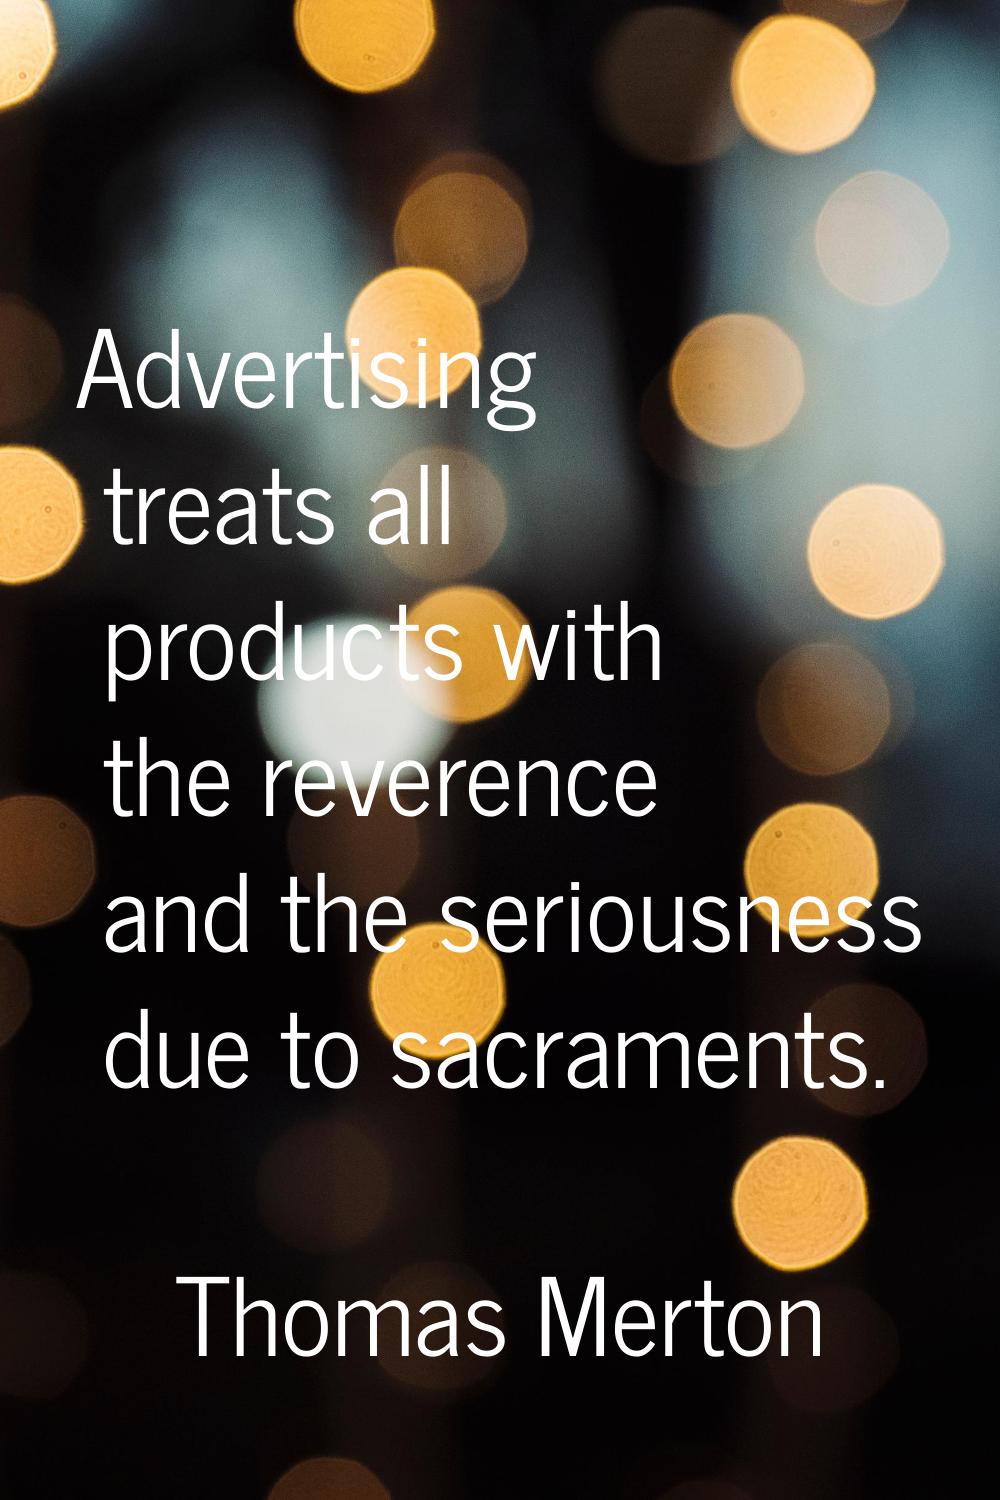 Advertising treats all products with the reverence and the seriousness due to sacraments.